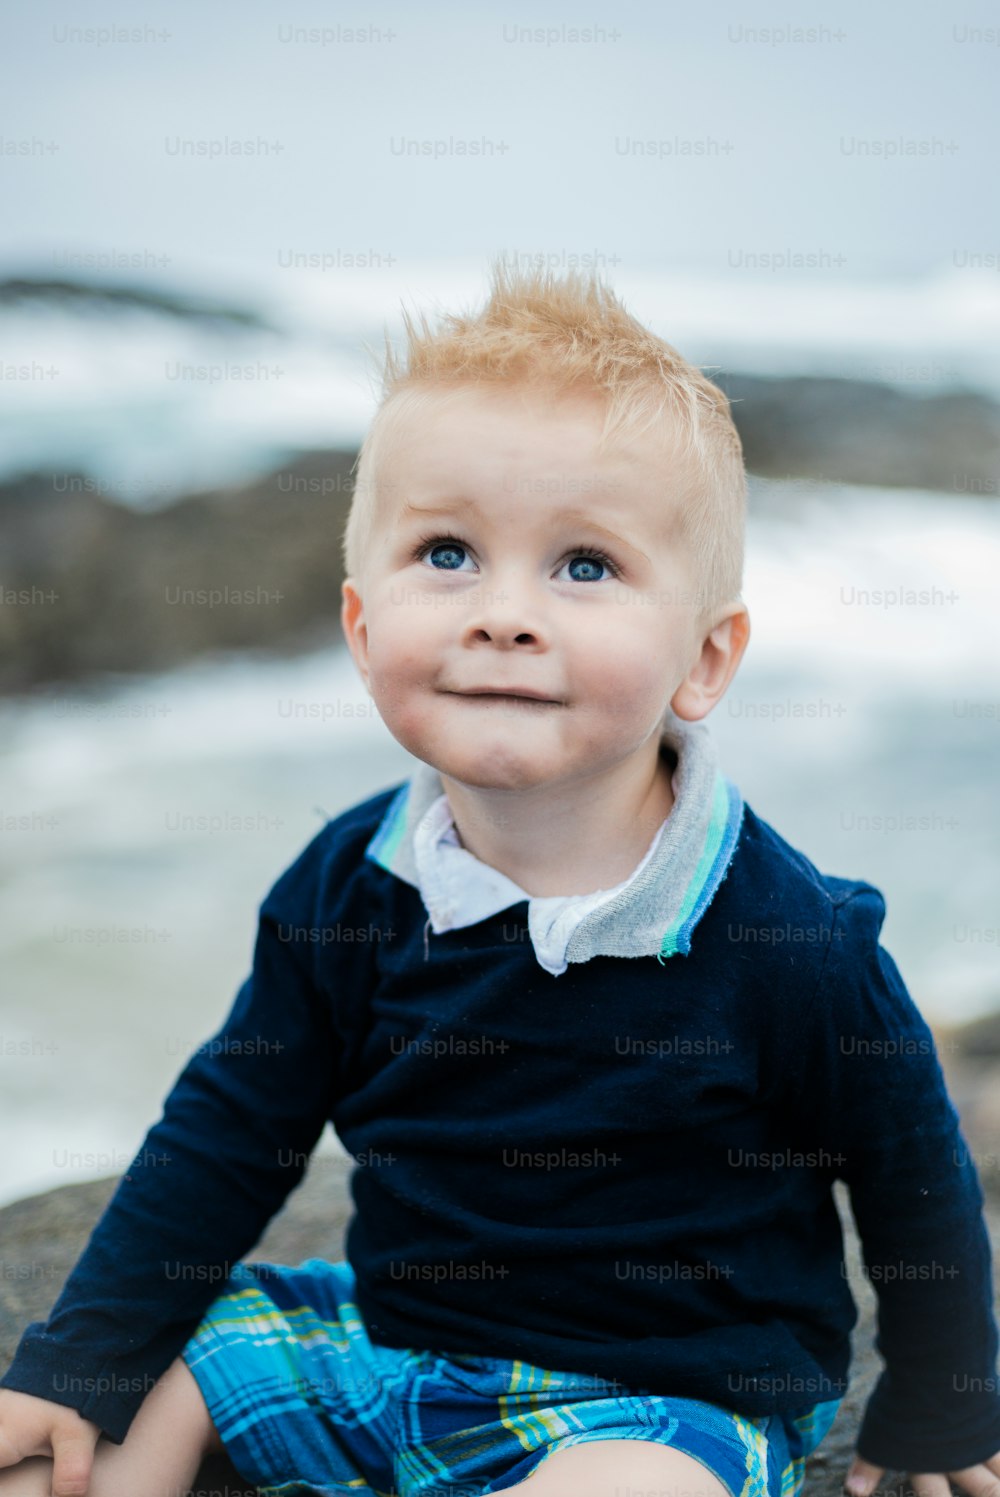 500+ Child Pictures  Download Free Images on Unsplash